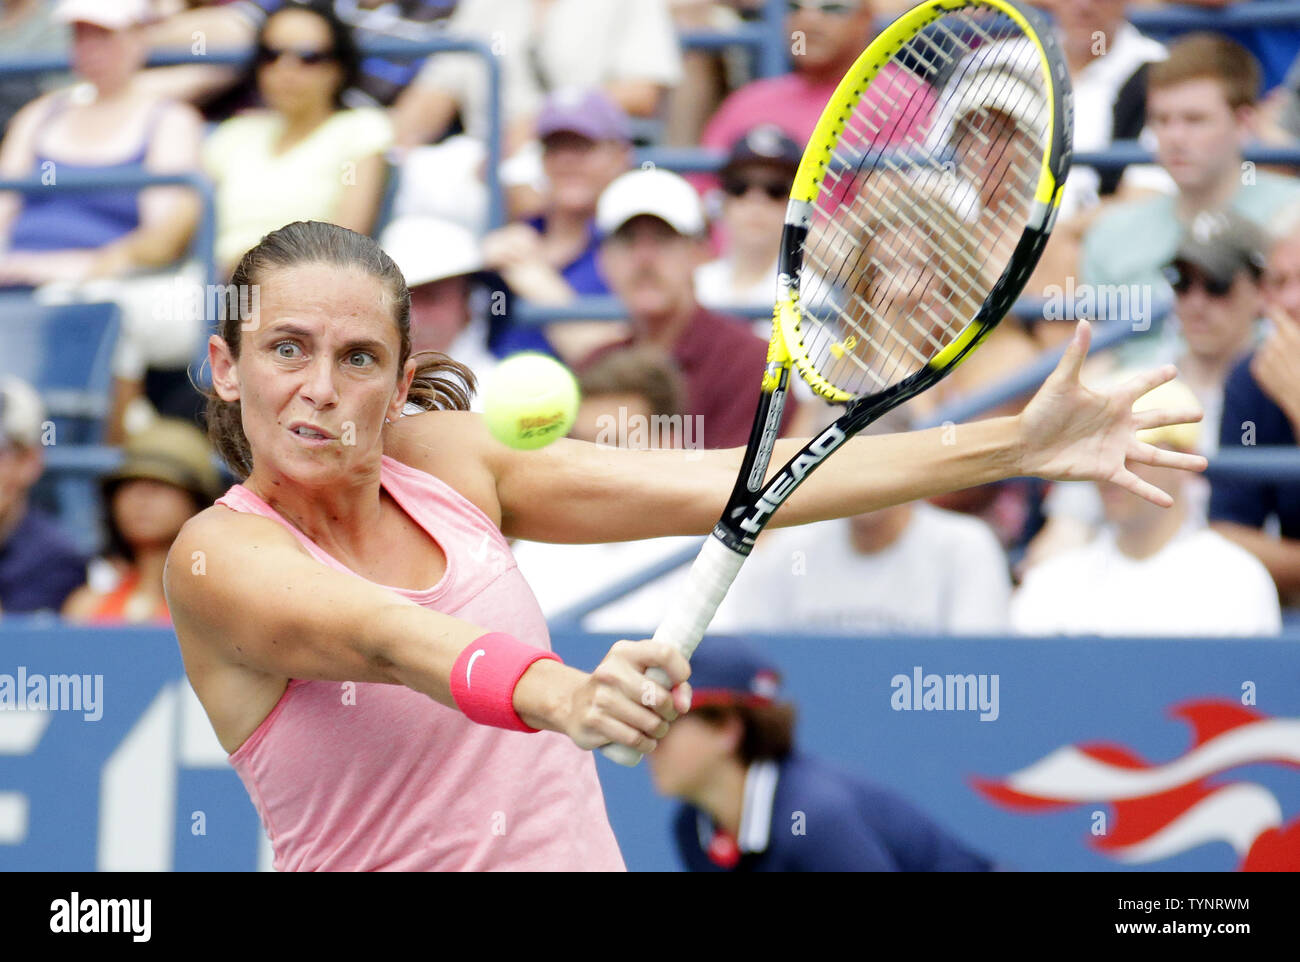 Roberta Vinci of Italy hits a backhand in her 4th round match against Camila Giorgi of Italy on day eight at the U.S. Open Tennis Championships at the USTA Billie Jean King National Tennis Center in New York City on September 2, 2013. Vinci defeated Giorgi 6-4, 6-2.   UPI/John Angelillo Stock Photo